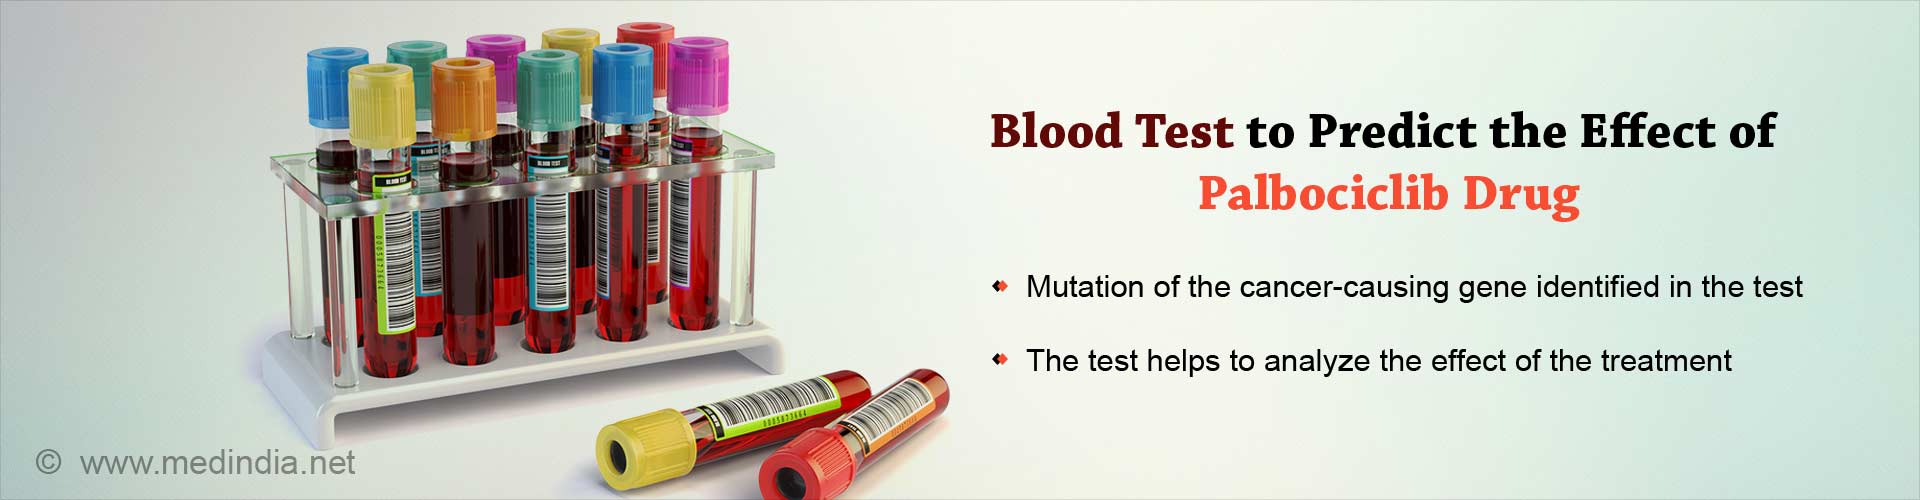 blood test to predict the effect of palbociclib drug
- mutation of the cancer-causing gene identified in the test
- the test helps to analyze the effect of the treatment